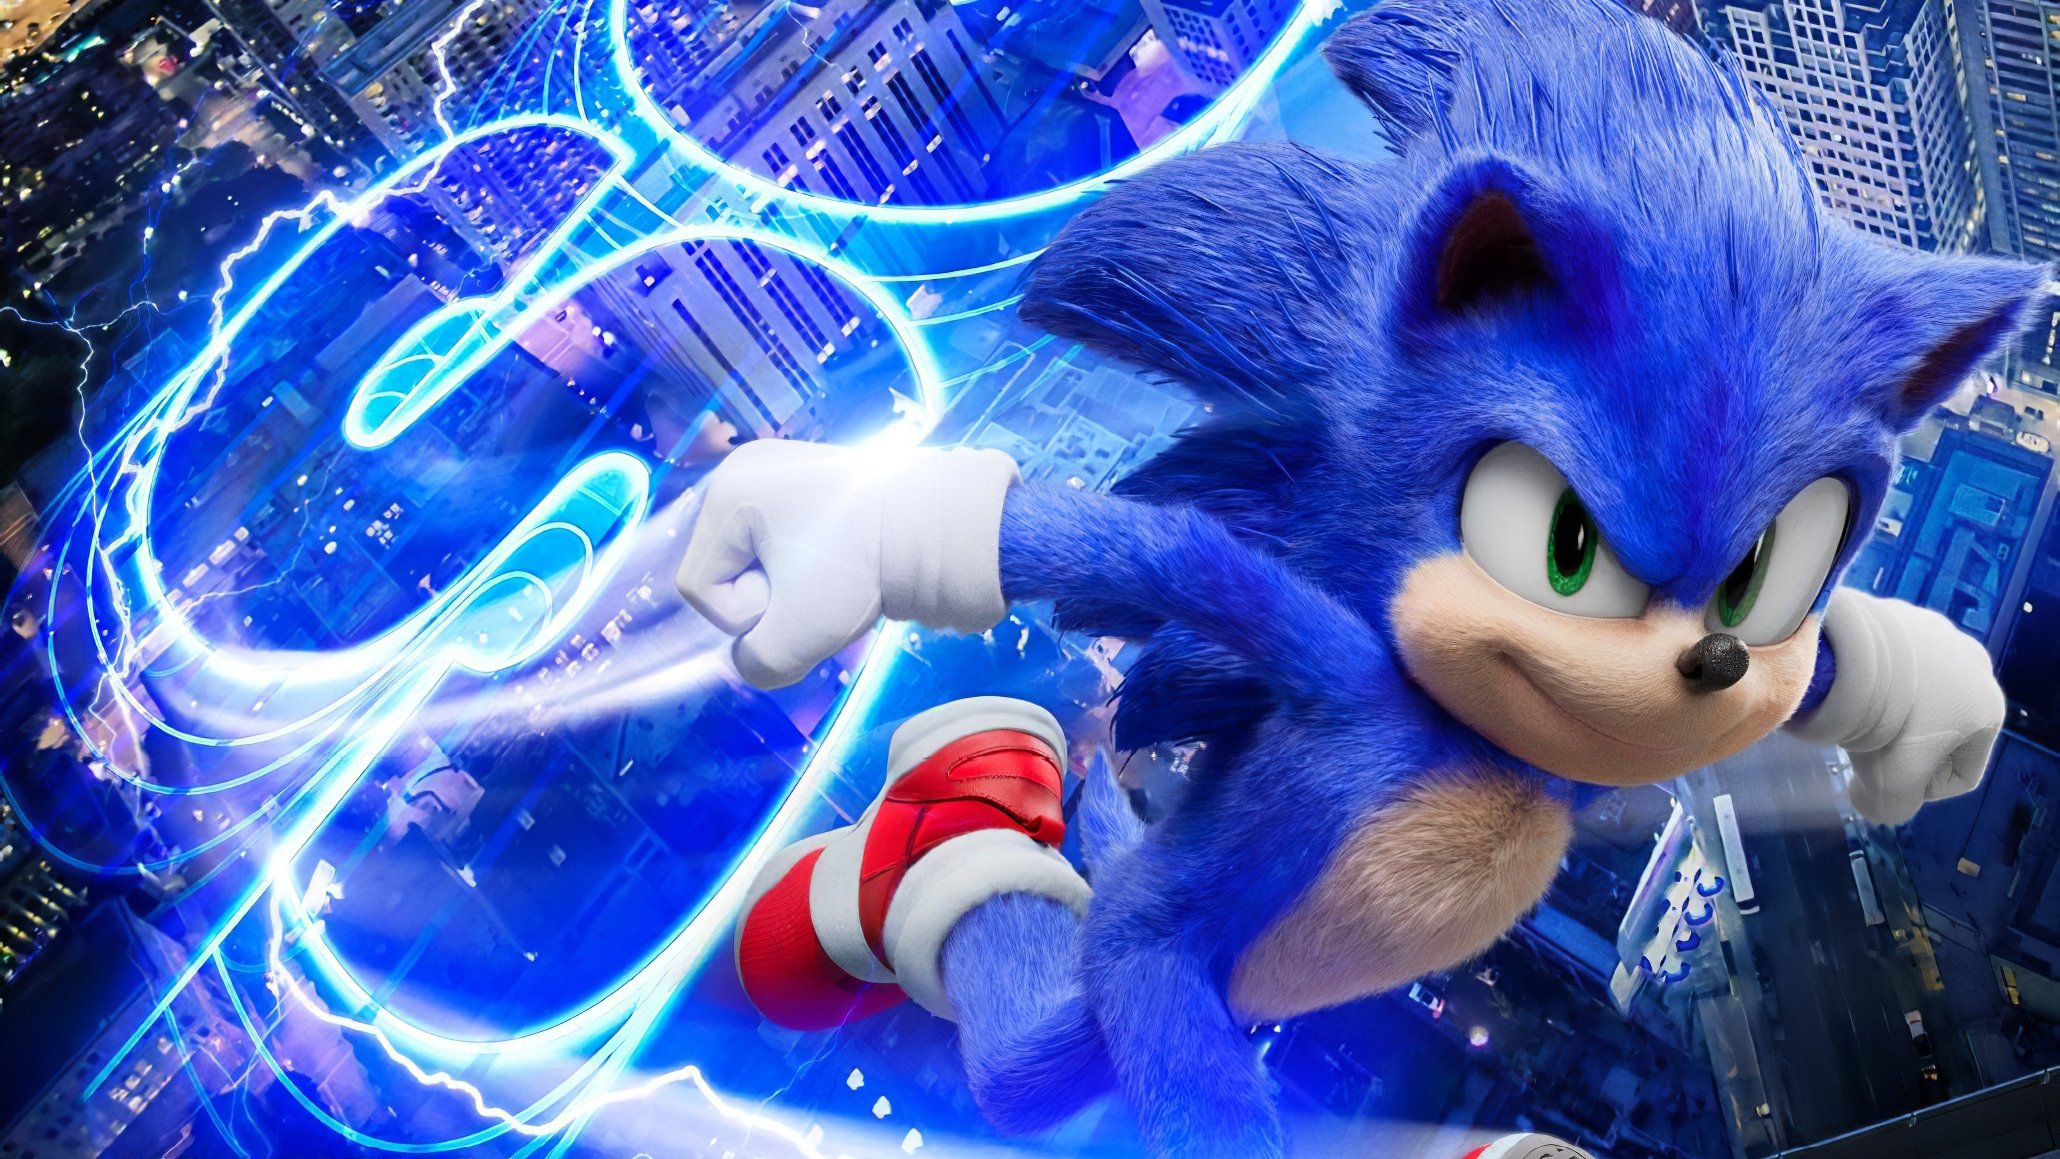 Sonic the Hedgehog (2020) HD Wallpaper. Background Image